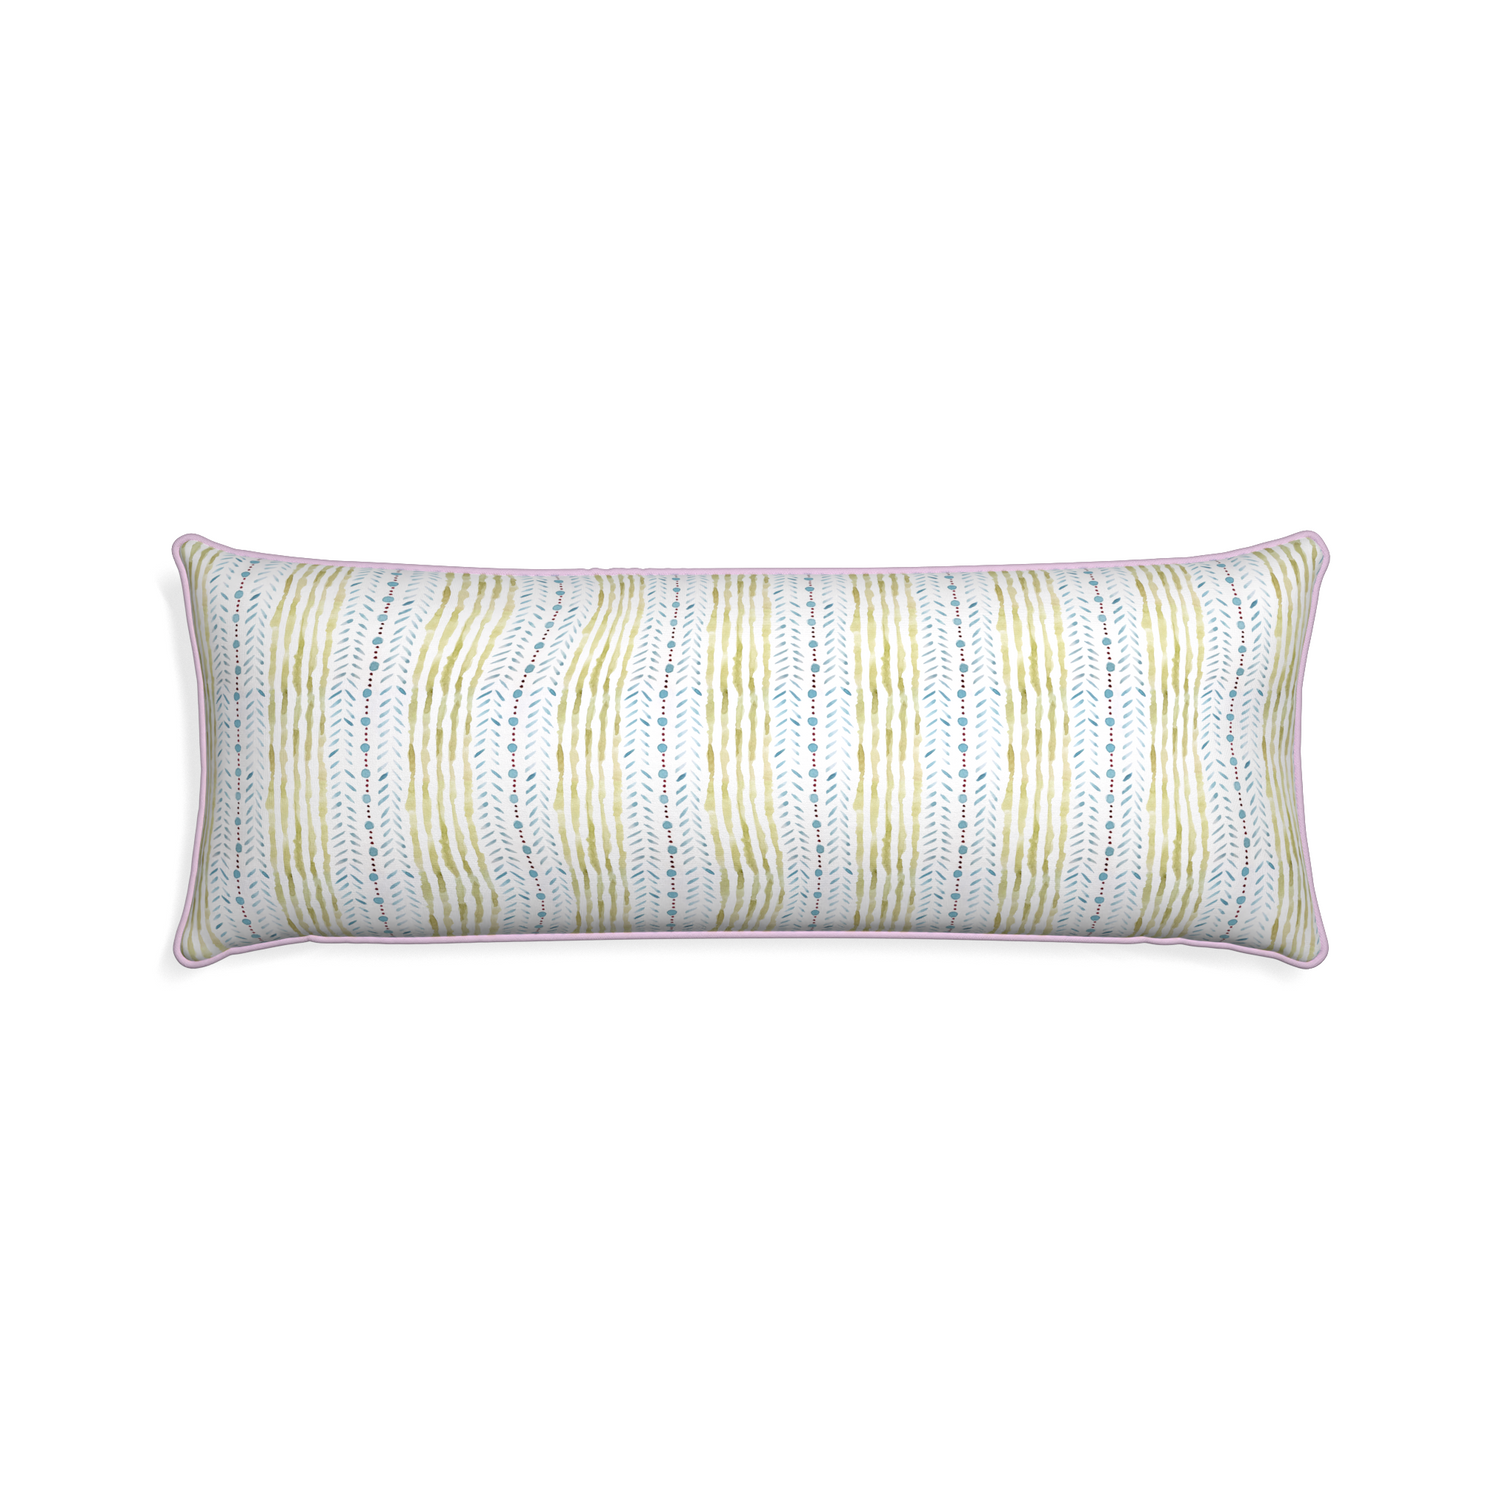 Xl-lumbar julia custom pillow with l piping on white background